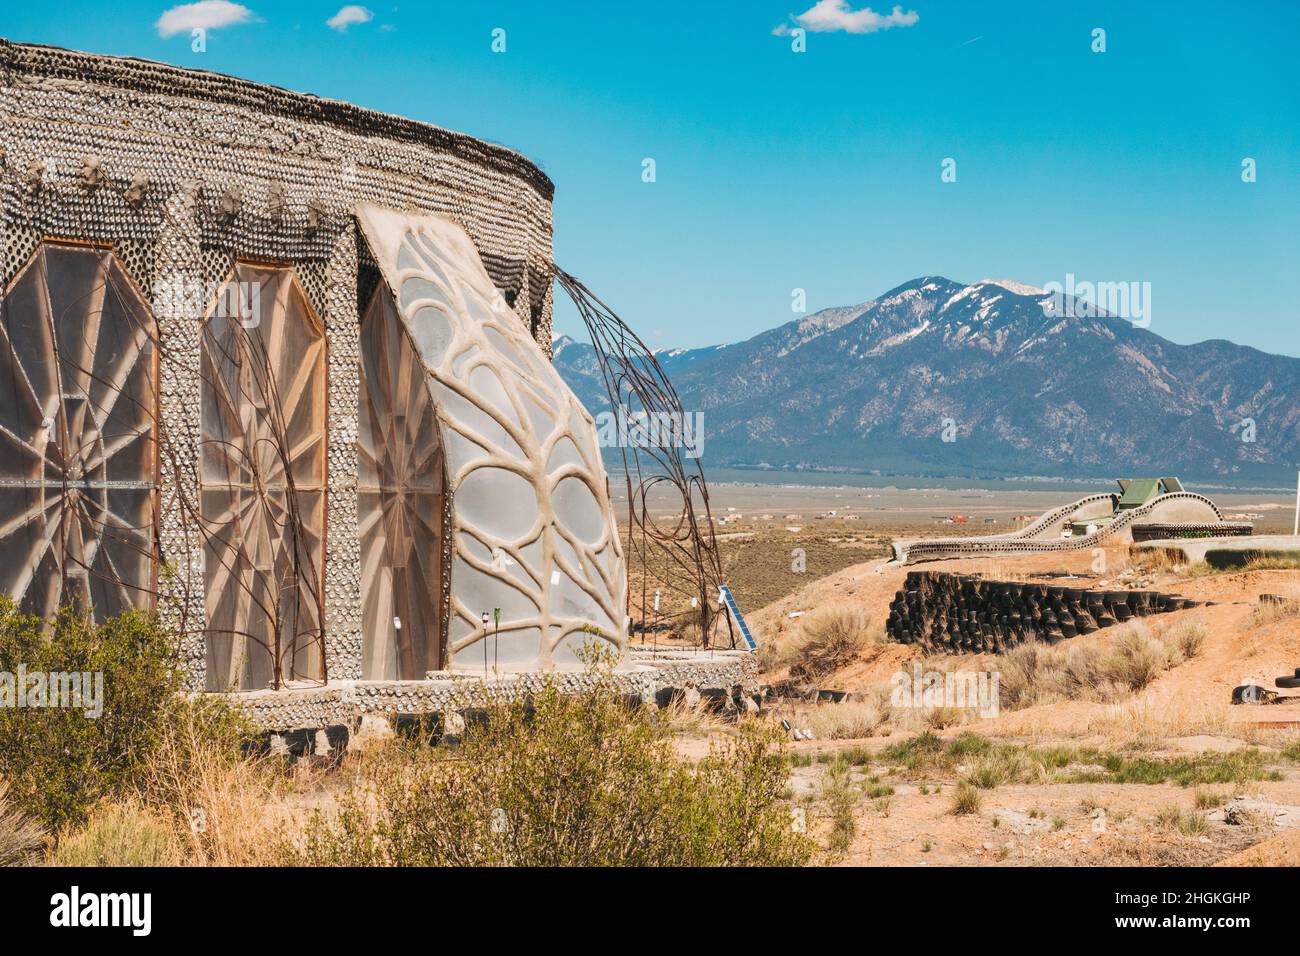 Earthship Biotecture near Taos, New Mexico, with self-sustaining homes made from natural and upcycled materials such as tires and glass bottles Stock Photo